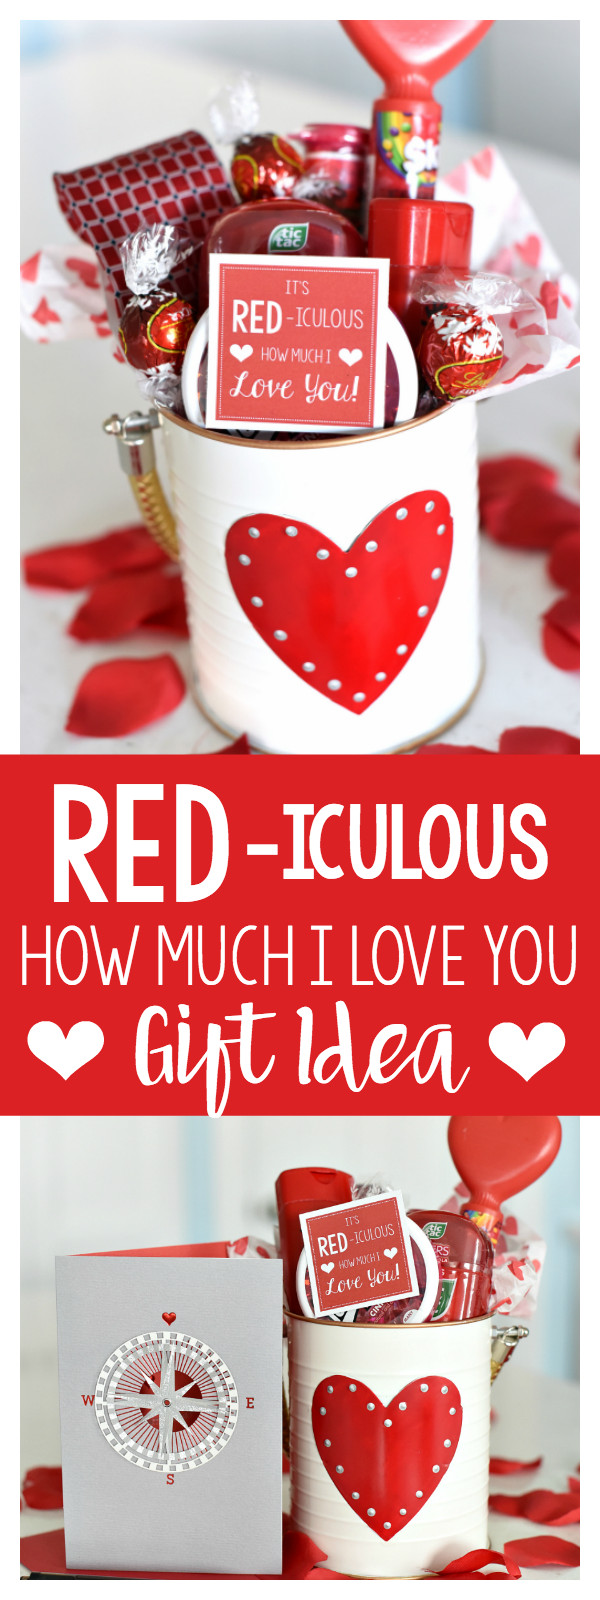 Cute Valentines Gift Ideas
 Cute Valentine s Day Gift Idea RED iculous Basket